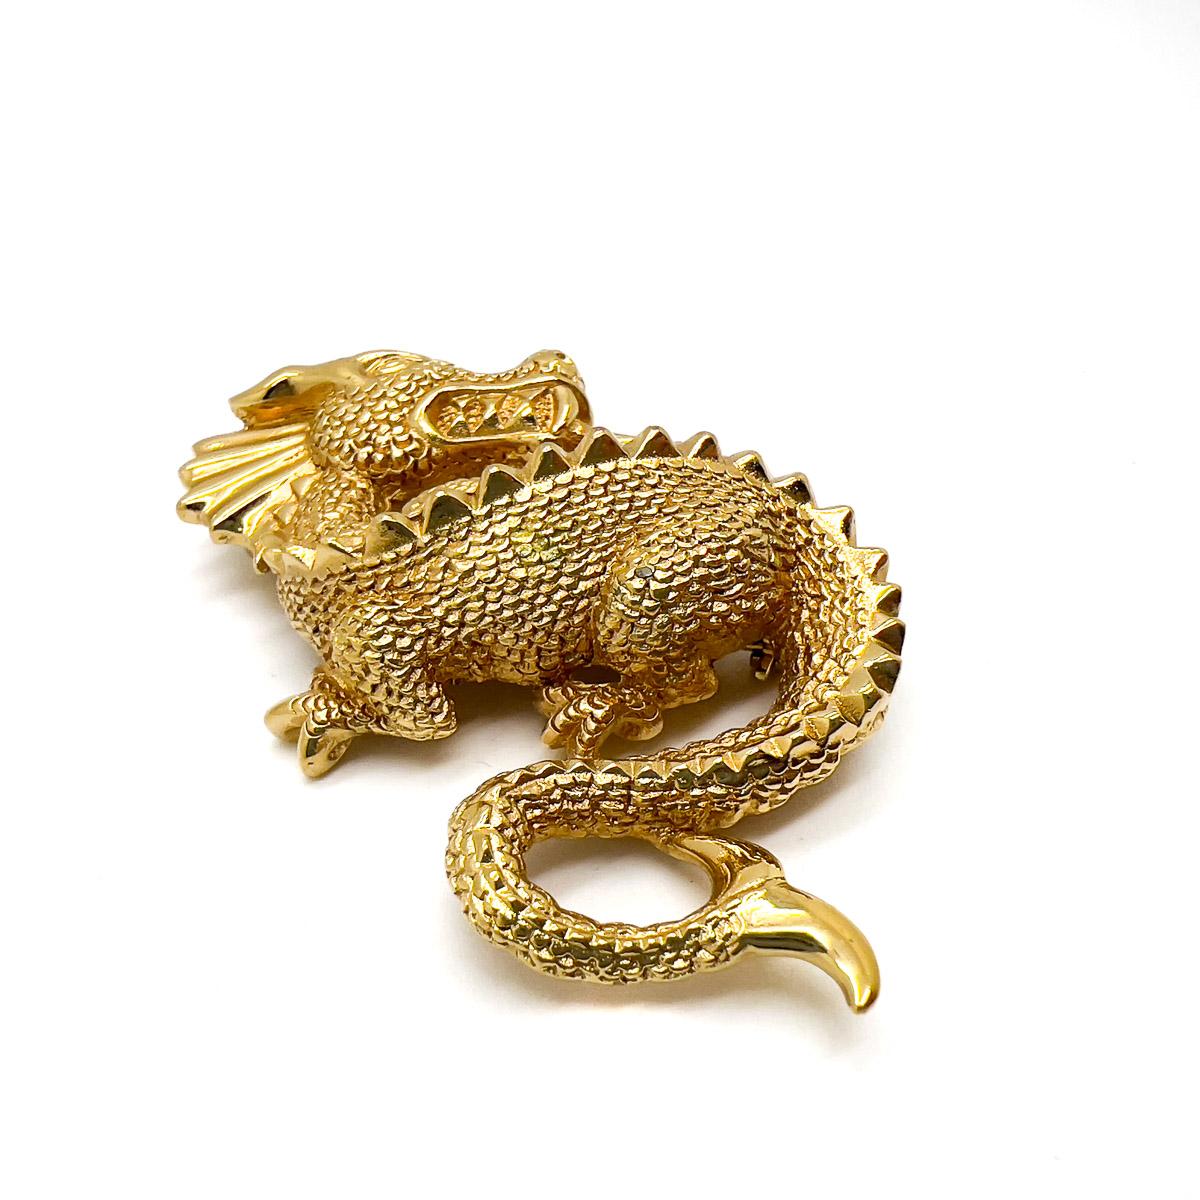 Vintage Christian Dior Mythological Dragon Brooch 1980s In Good Condition For Sale In Wilmslow, GB